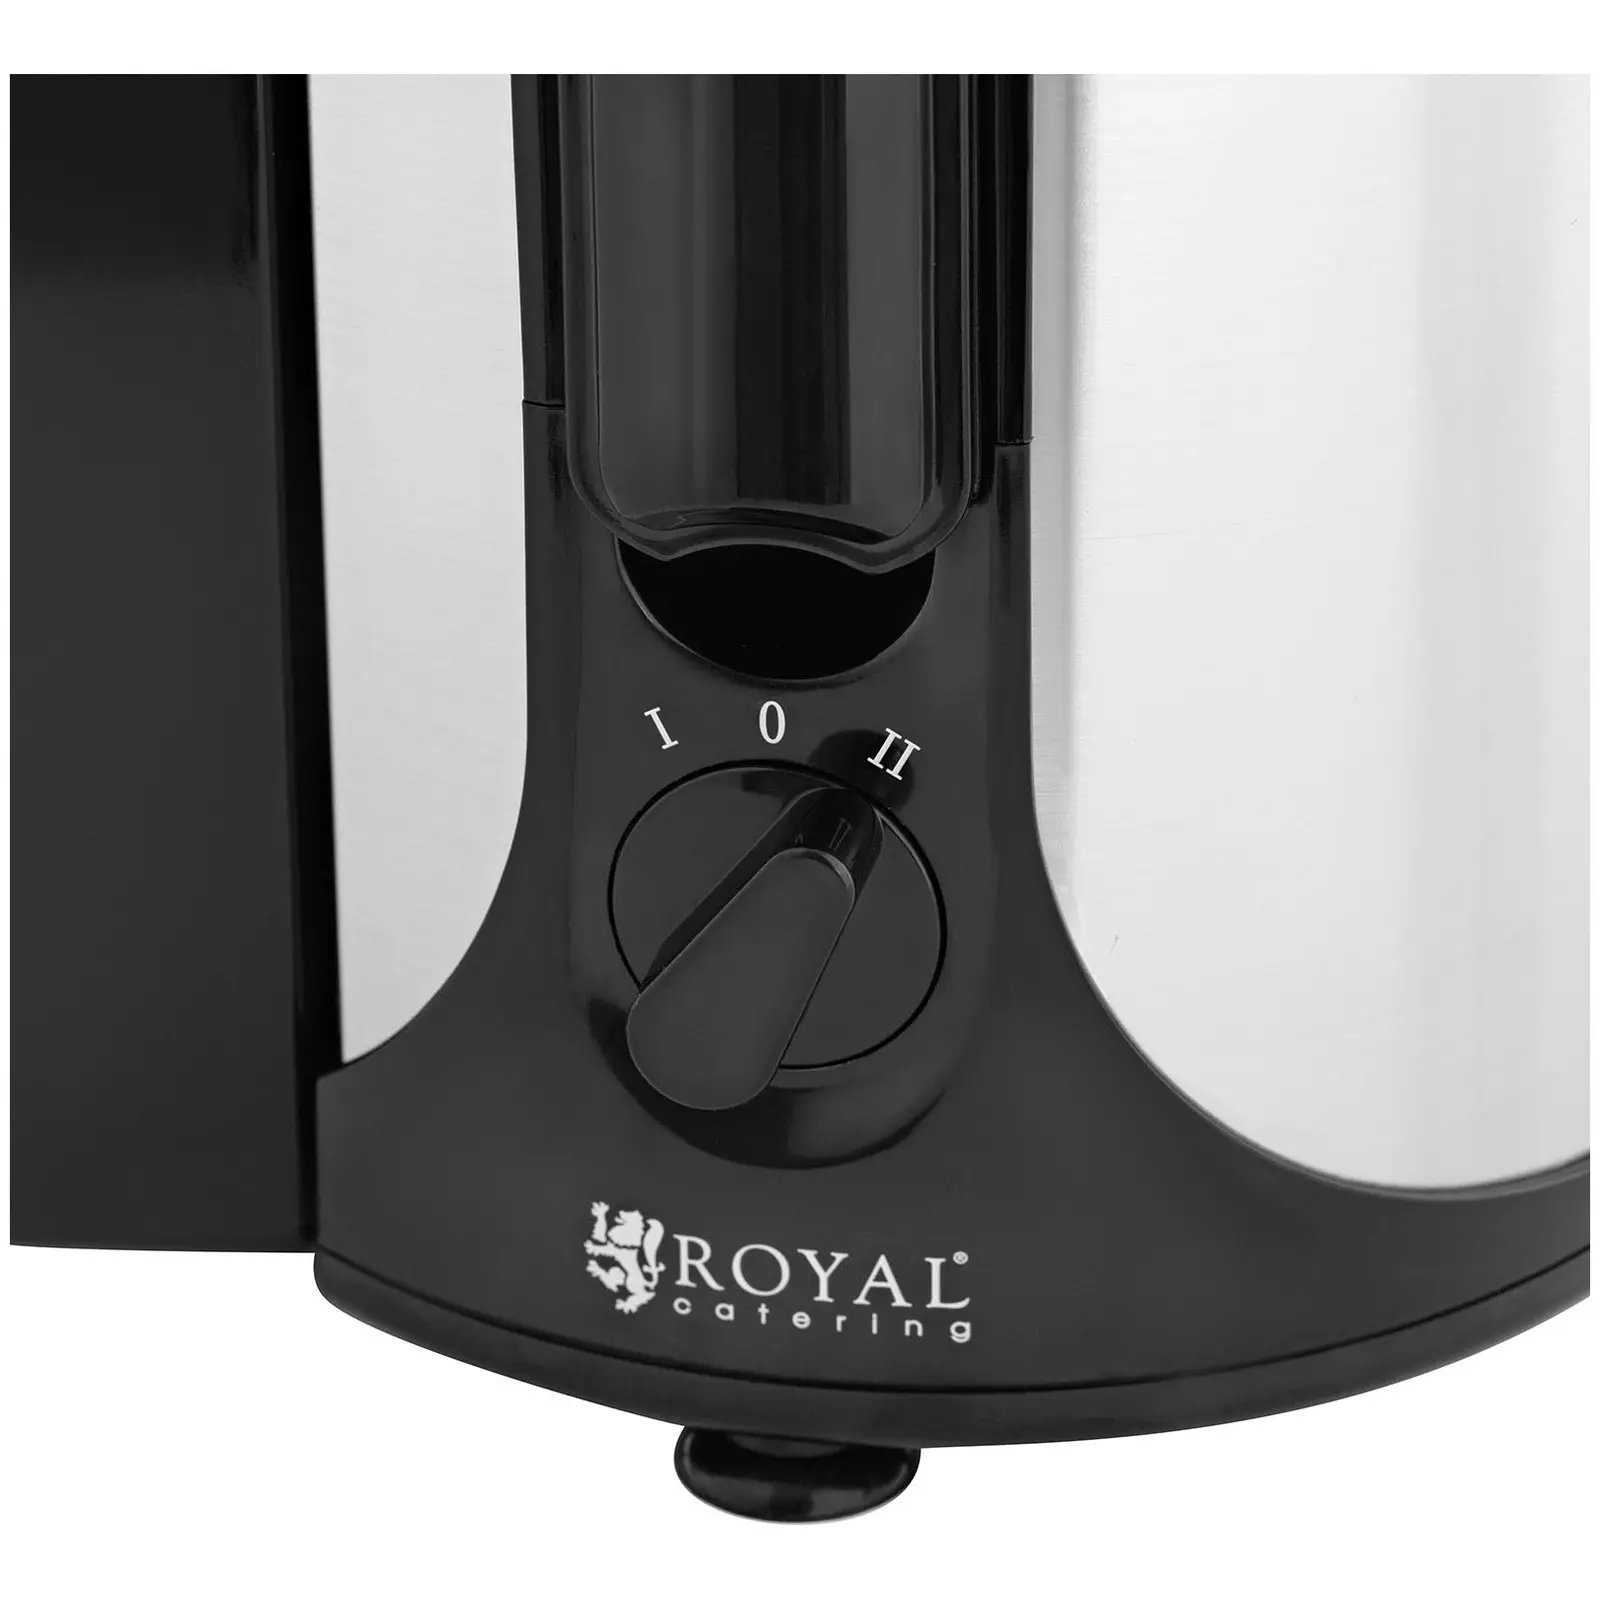 Entsafter - 1,200 W - Royal Catering